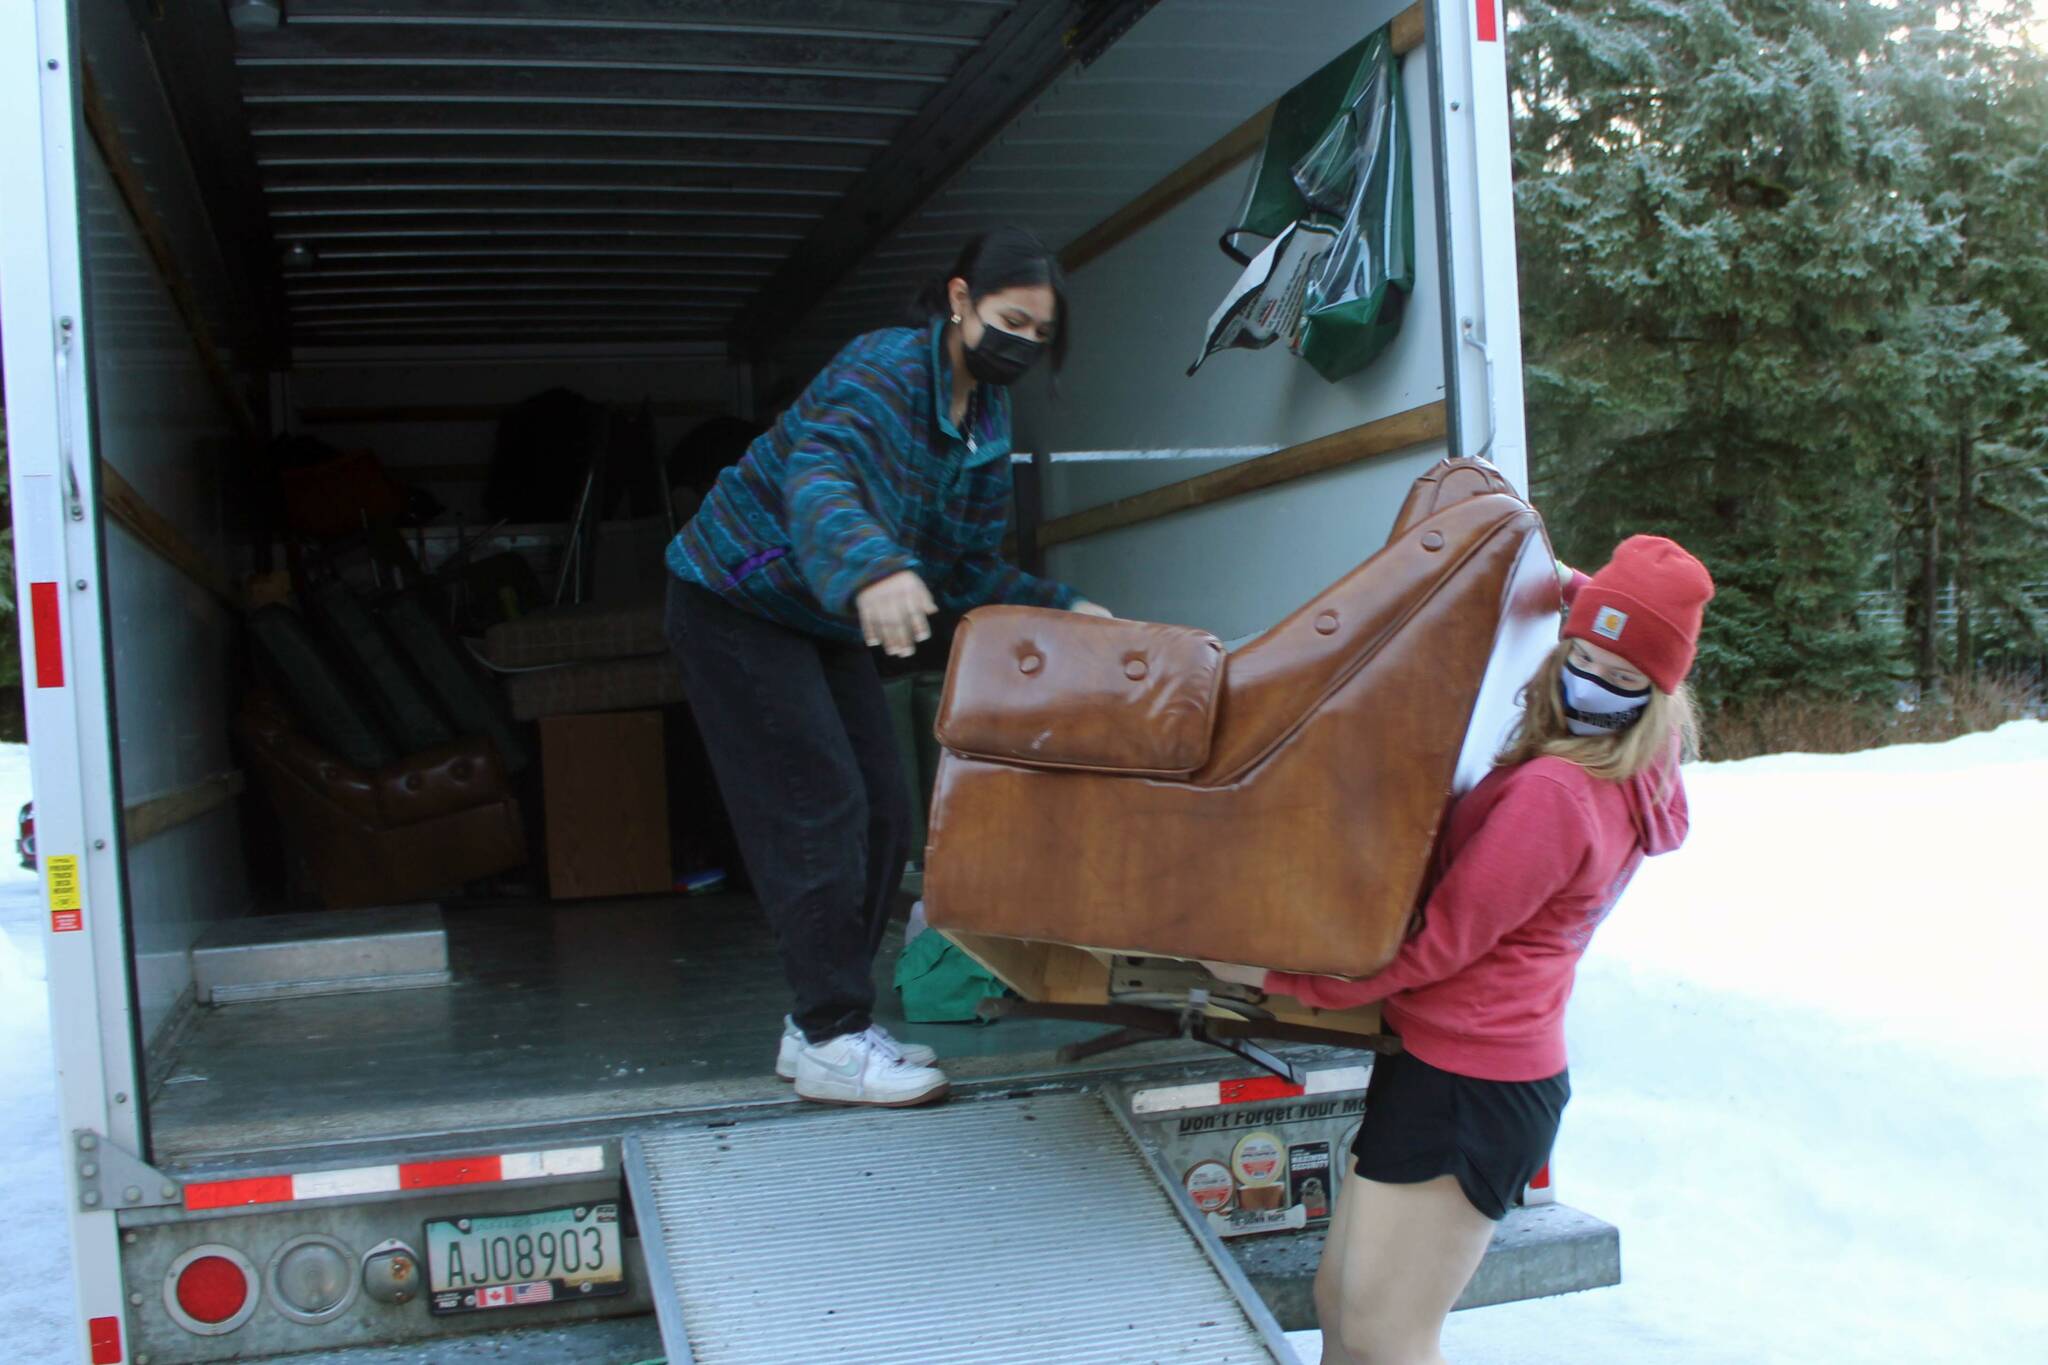 Mercedes Cordero, left, a junior at Thunder Mountain High School,and Gwen Lockwood, a senior at TMHS moved a chair at Chapel by the Lake on Jan. 17. The pair, along with about 20 other high school students, spent part of their Martin Luther King Jr. holiday chipping in with other volunteers readying the church to receive students from Riverbend School. (Dana Zigmund/Juneau Empire)